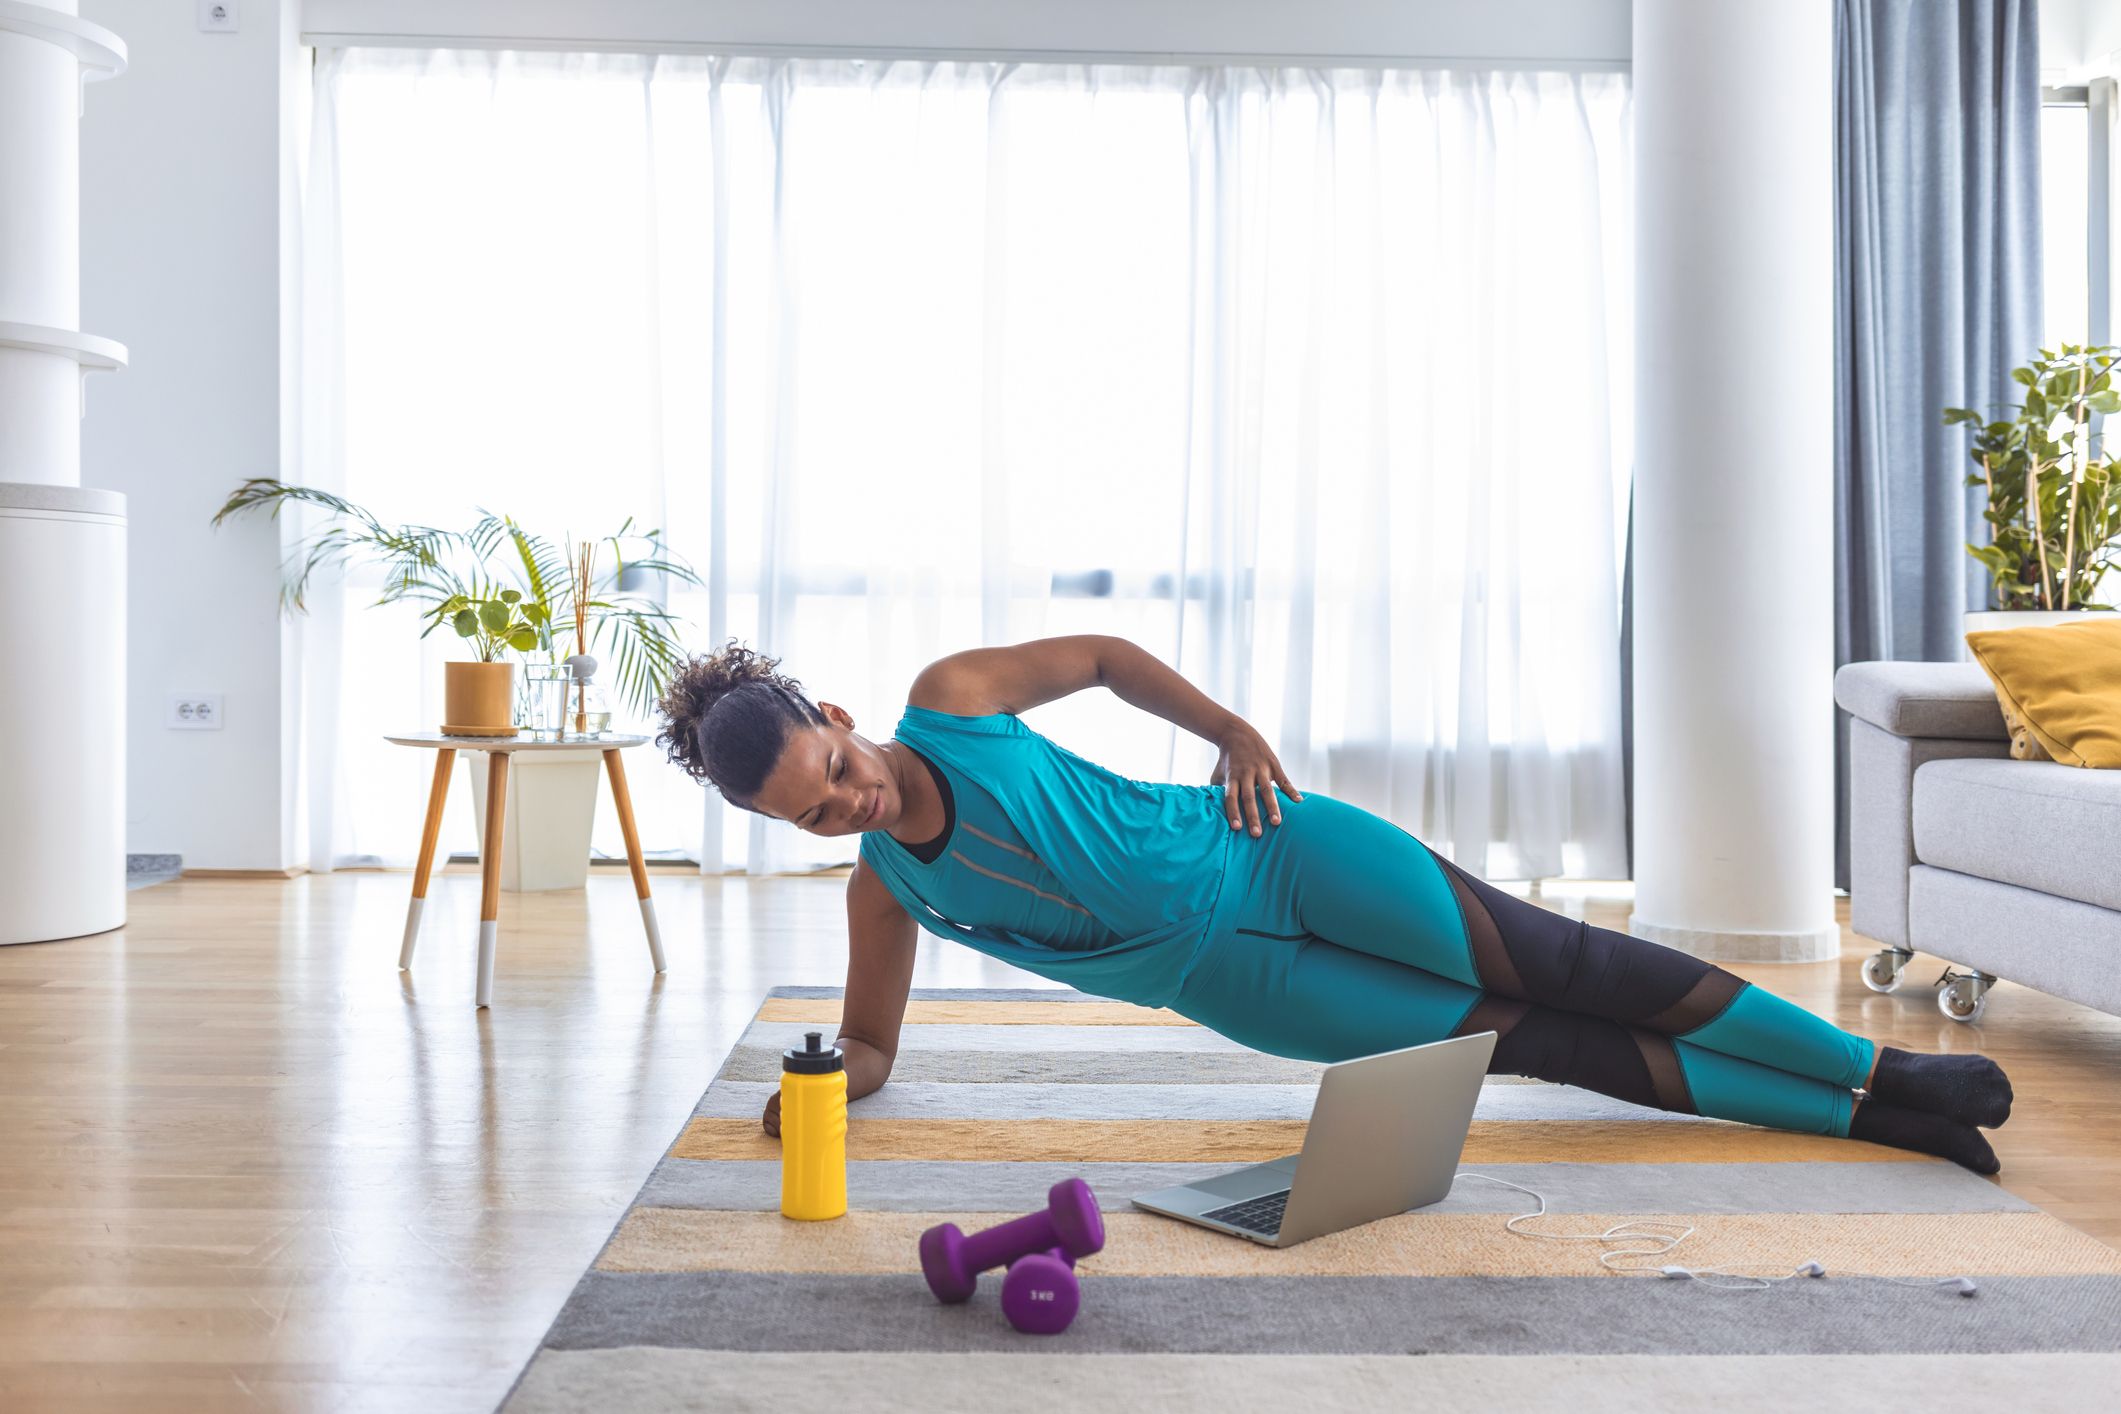 Pilates for beginners: types, benefits and how to start